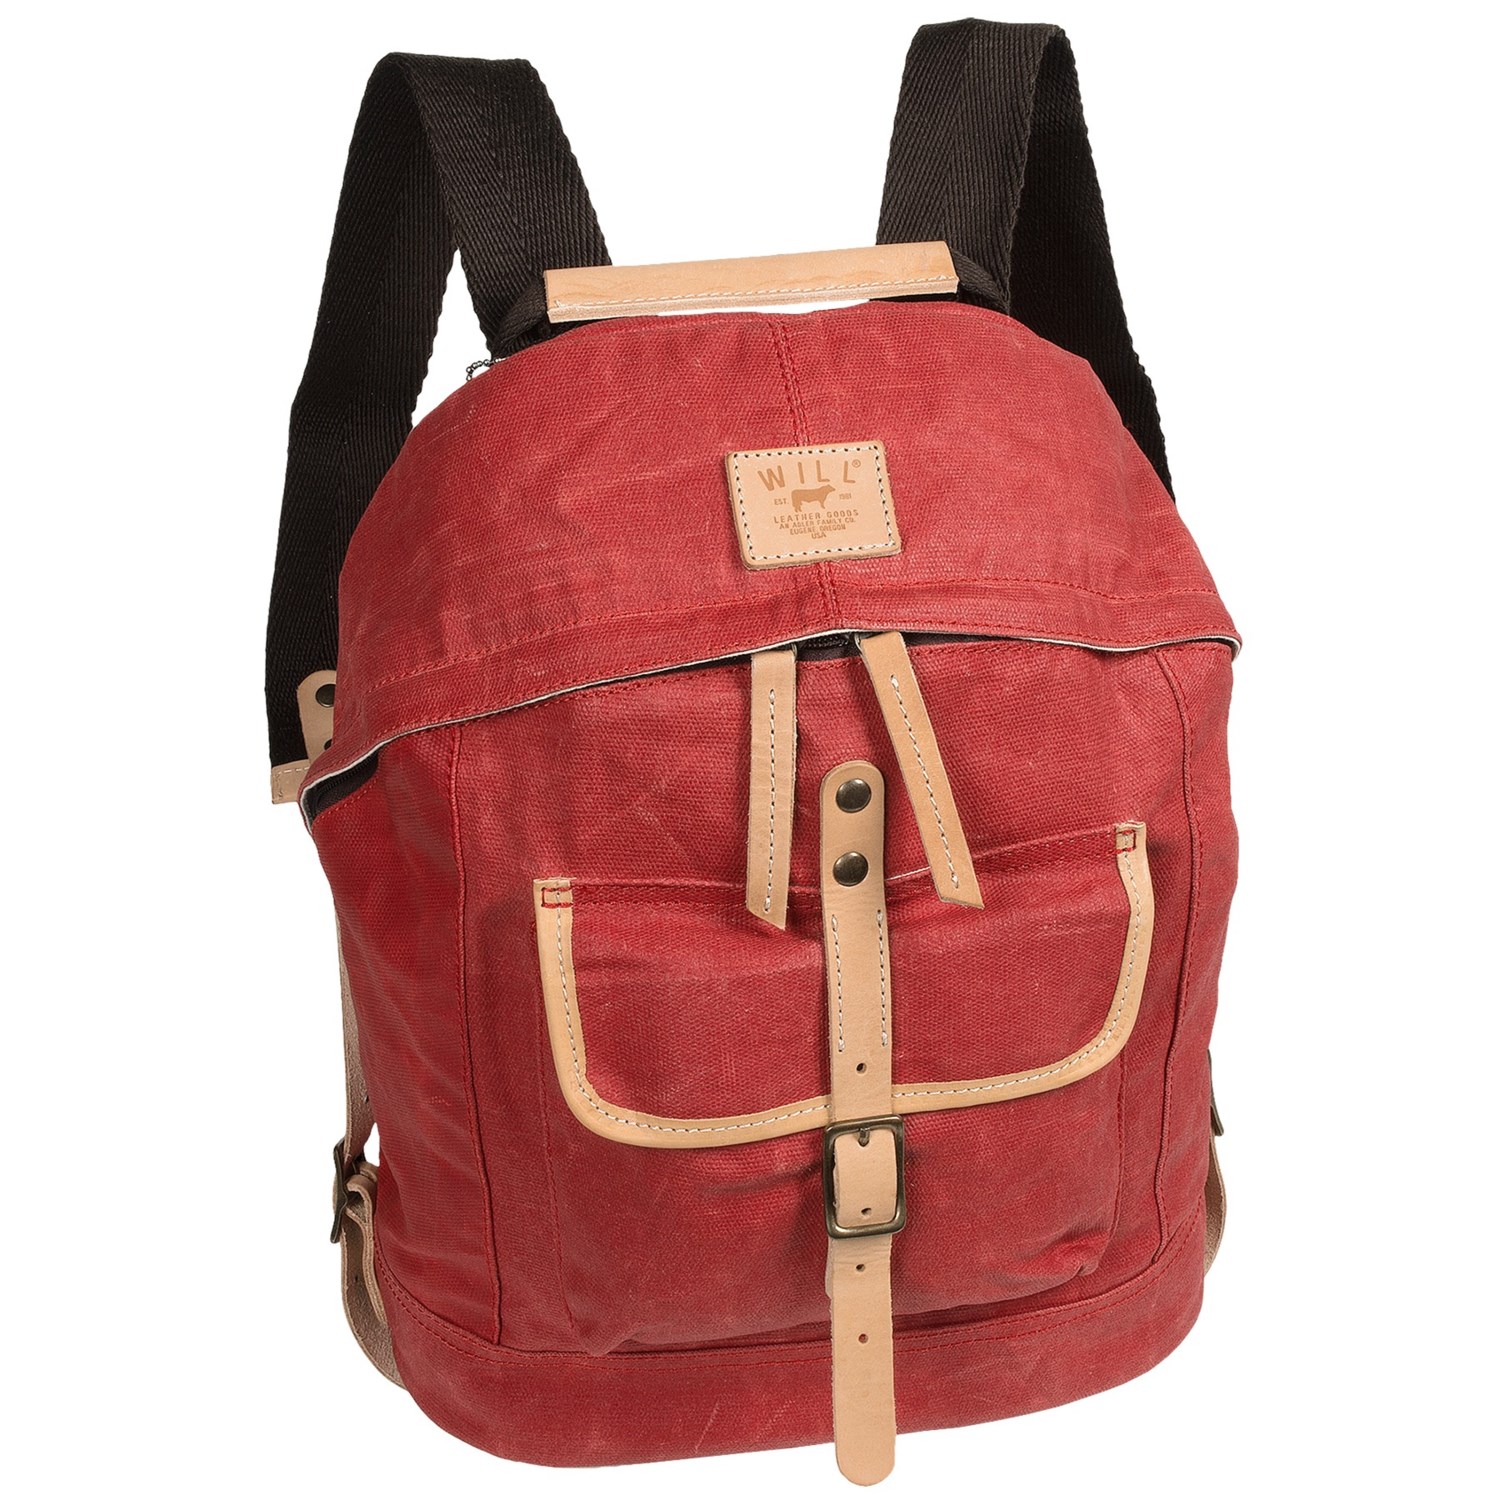 Will Leather Goods Dome Backpack - Waxed Canvas, Laptop Sleeve 8464C - Save 65%